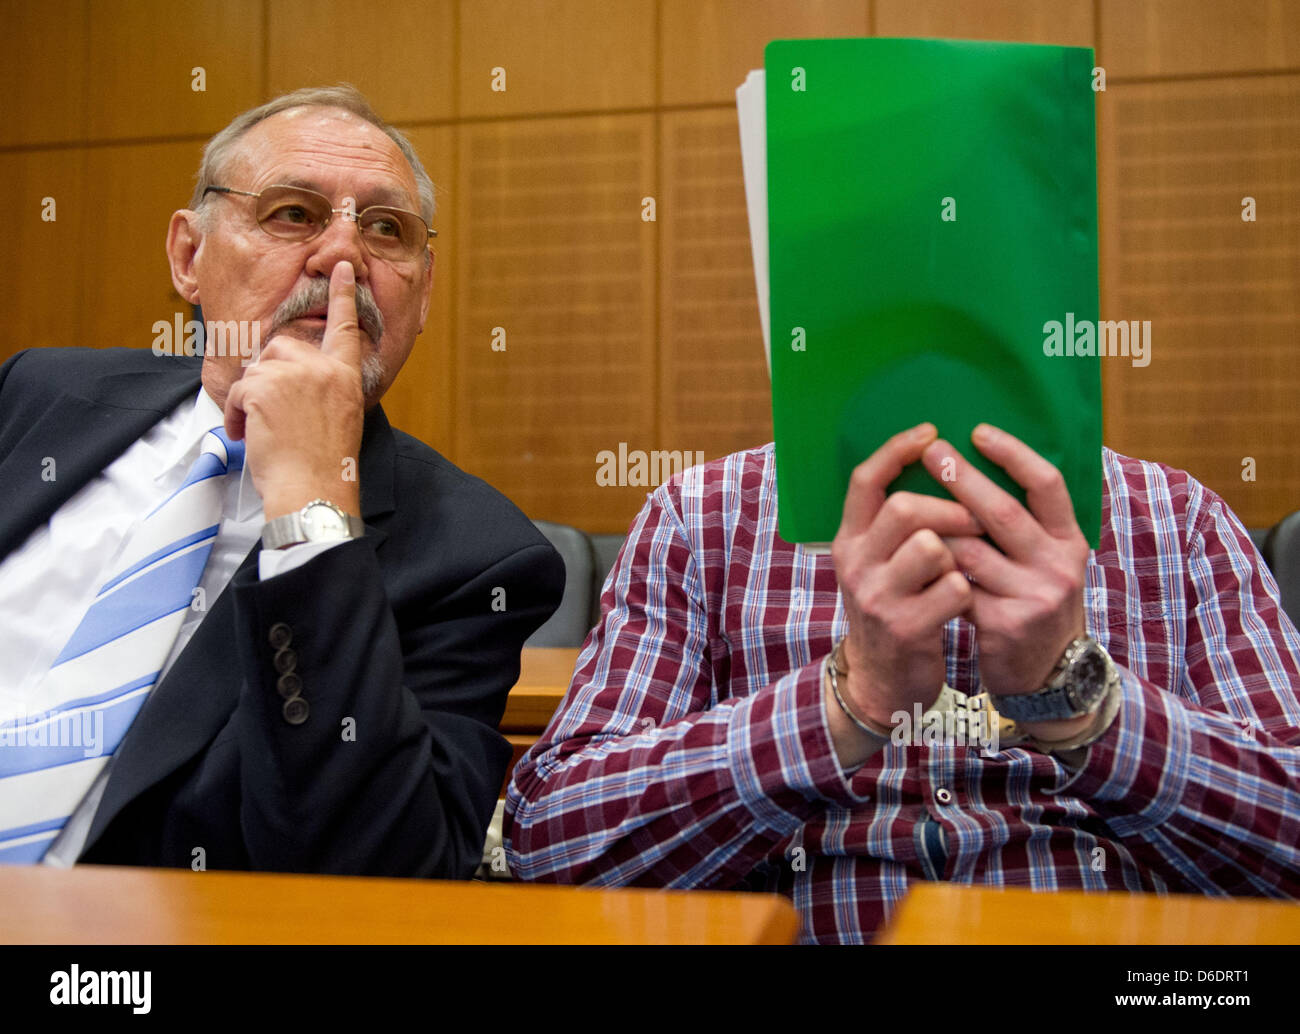 Bus hijacker Thomas Feldmann hides his face behind files at the start of his trial in a high-security court room of the district court in frankfurt Main, Germany, 12 September 2012. His lawywe Hans-Juergen Borowsky sits next to him. 47 year old Feldmann is accused of extortion, deprivation of liberty and assualt, amongst other things. Thomas Feldhofer was the most wanted criminals  Stock Photo